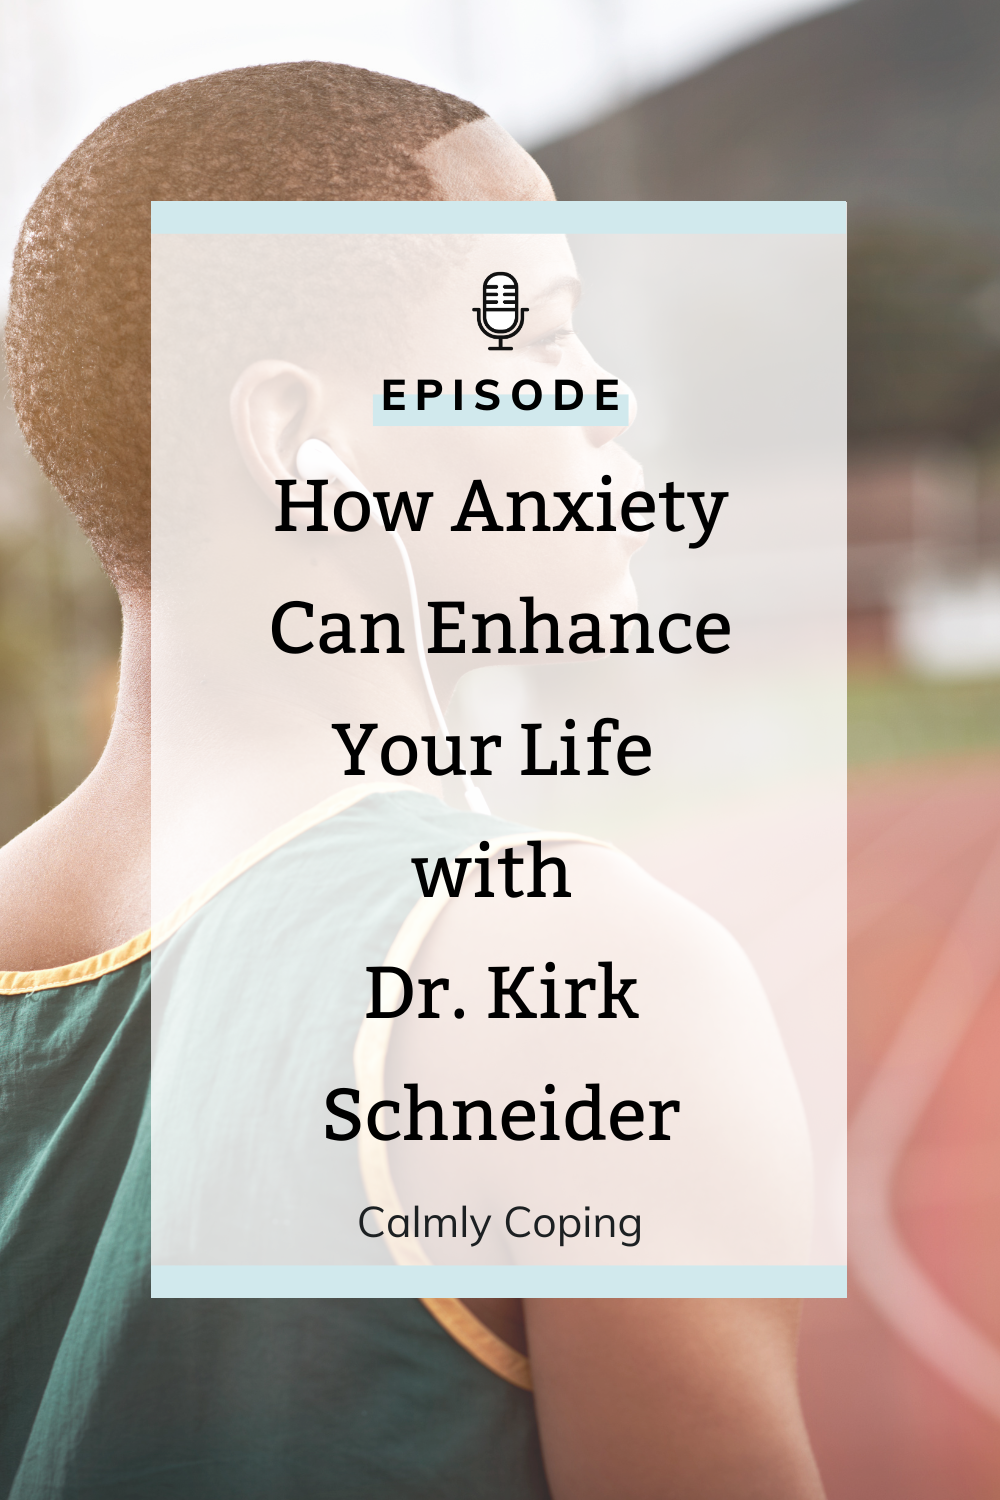 How Anxiety Can Enhance Your Life with Dr. Kirk Schneider